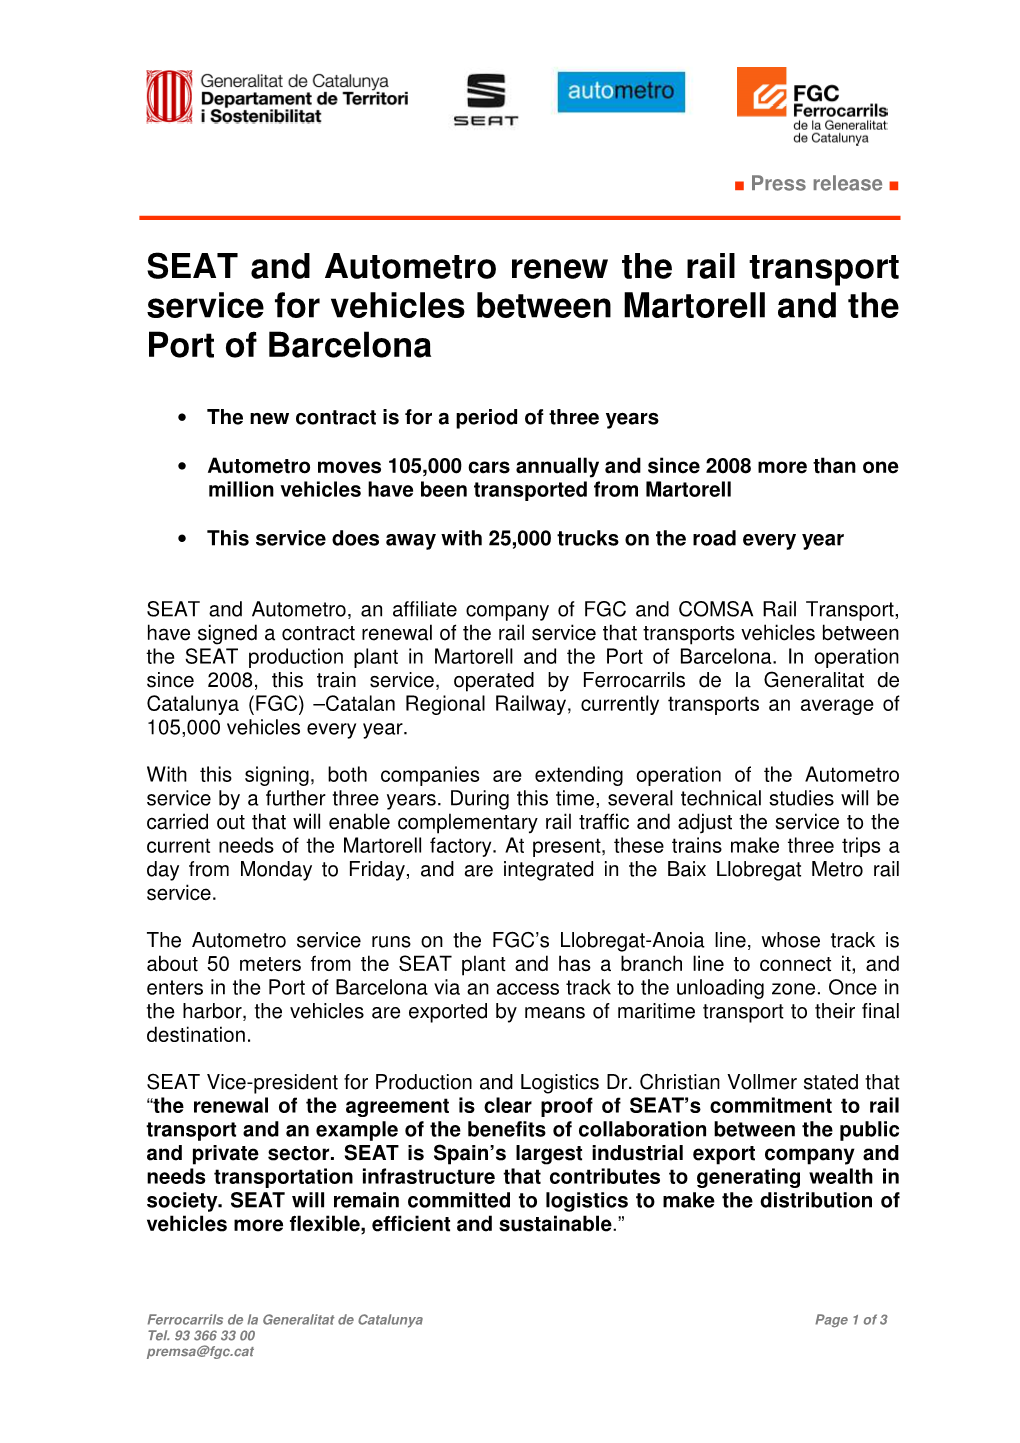 SEAT and Autometro Renew the Rail Transport Service for Vehicles Between Martorell and the Port of Barcelona